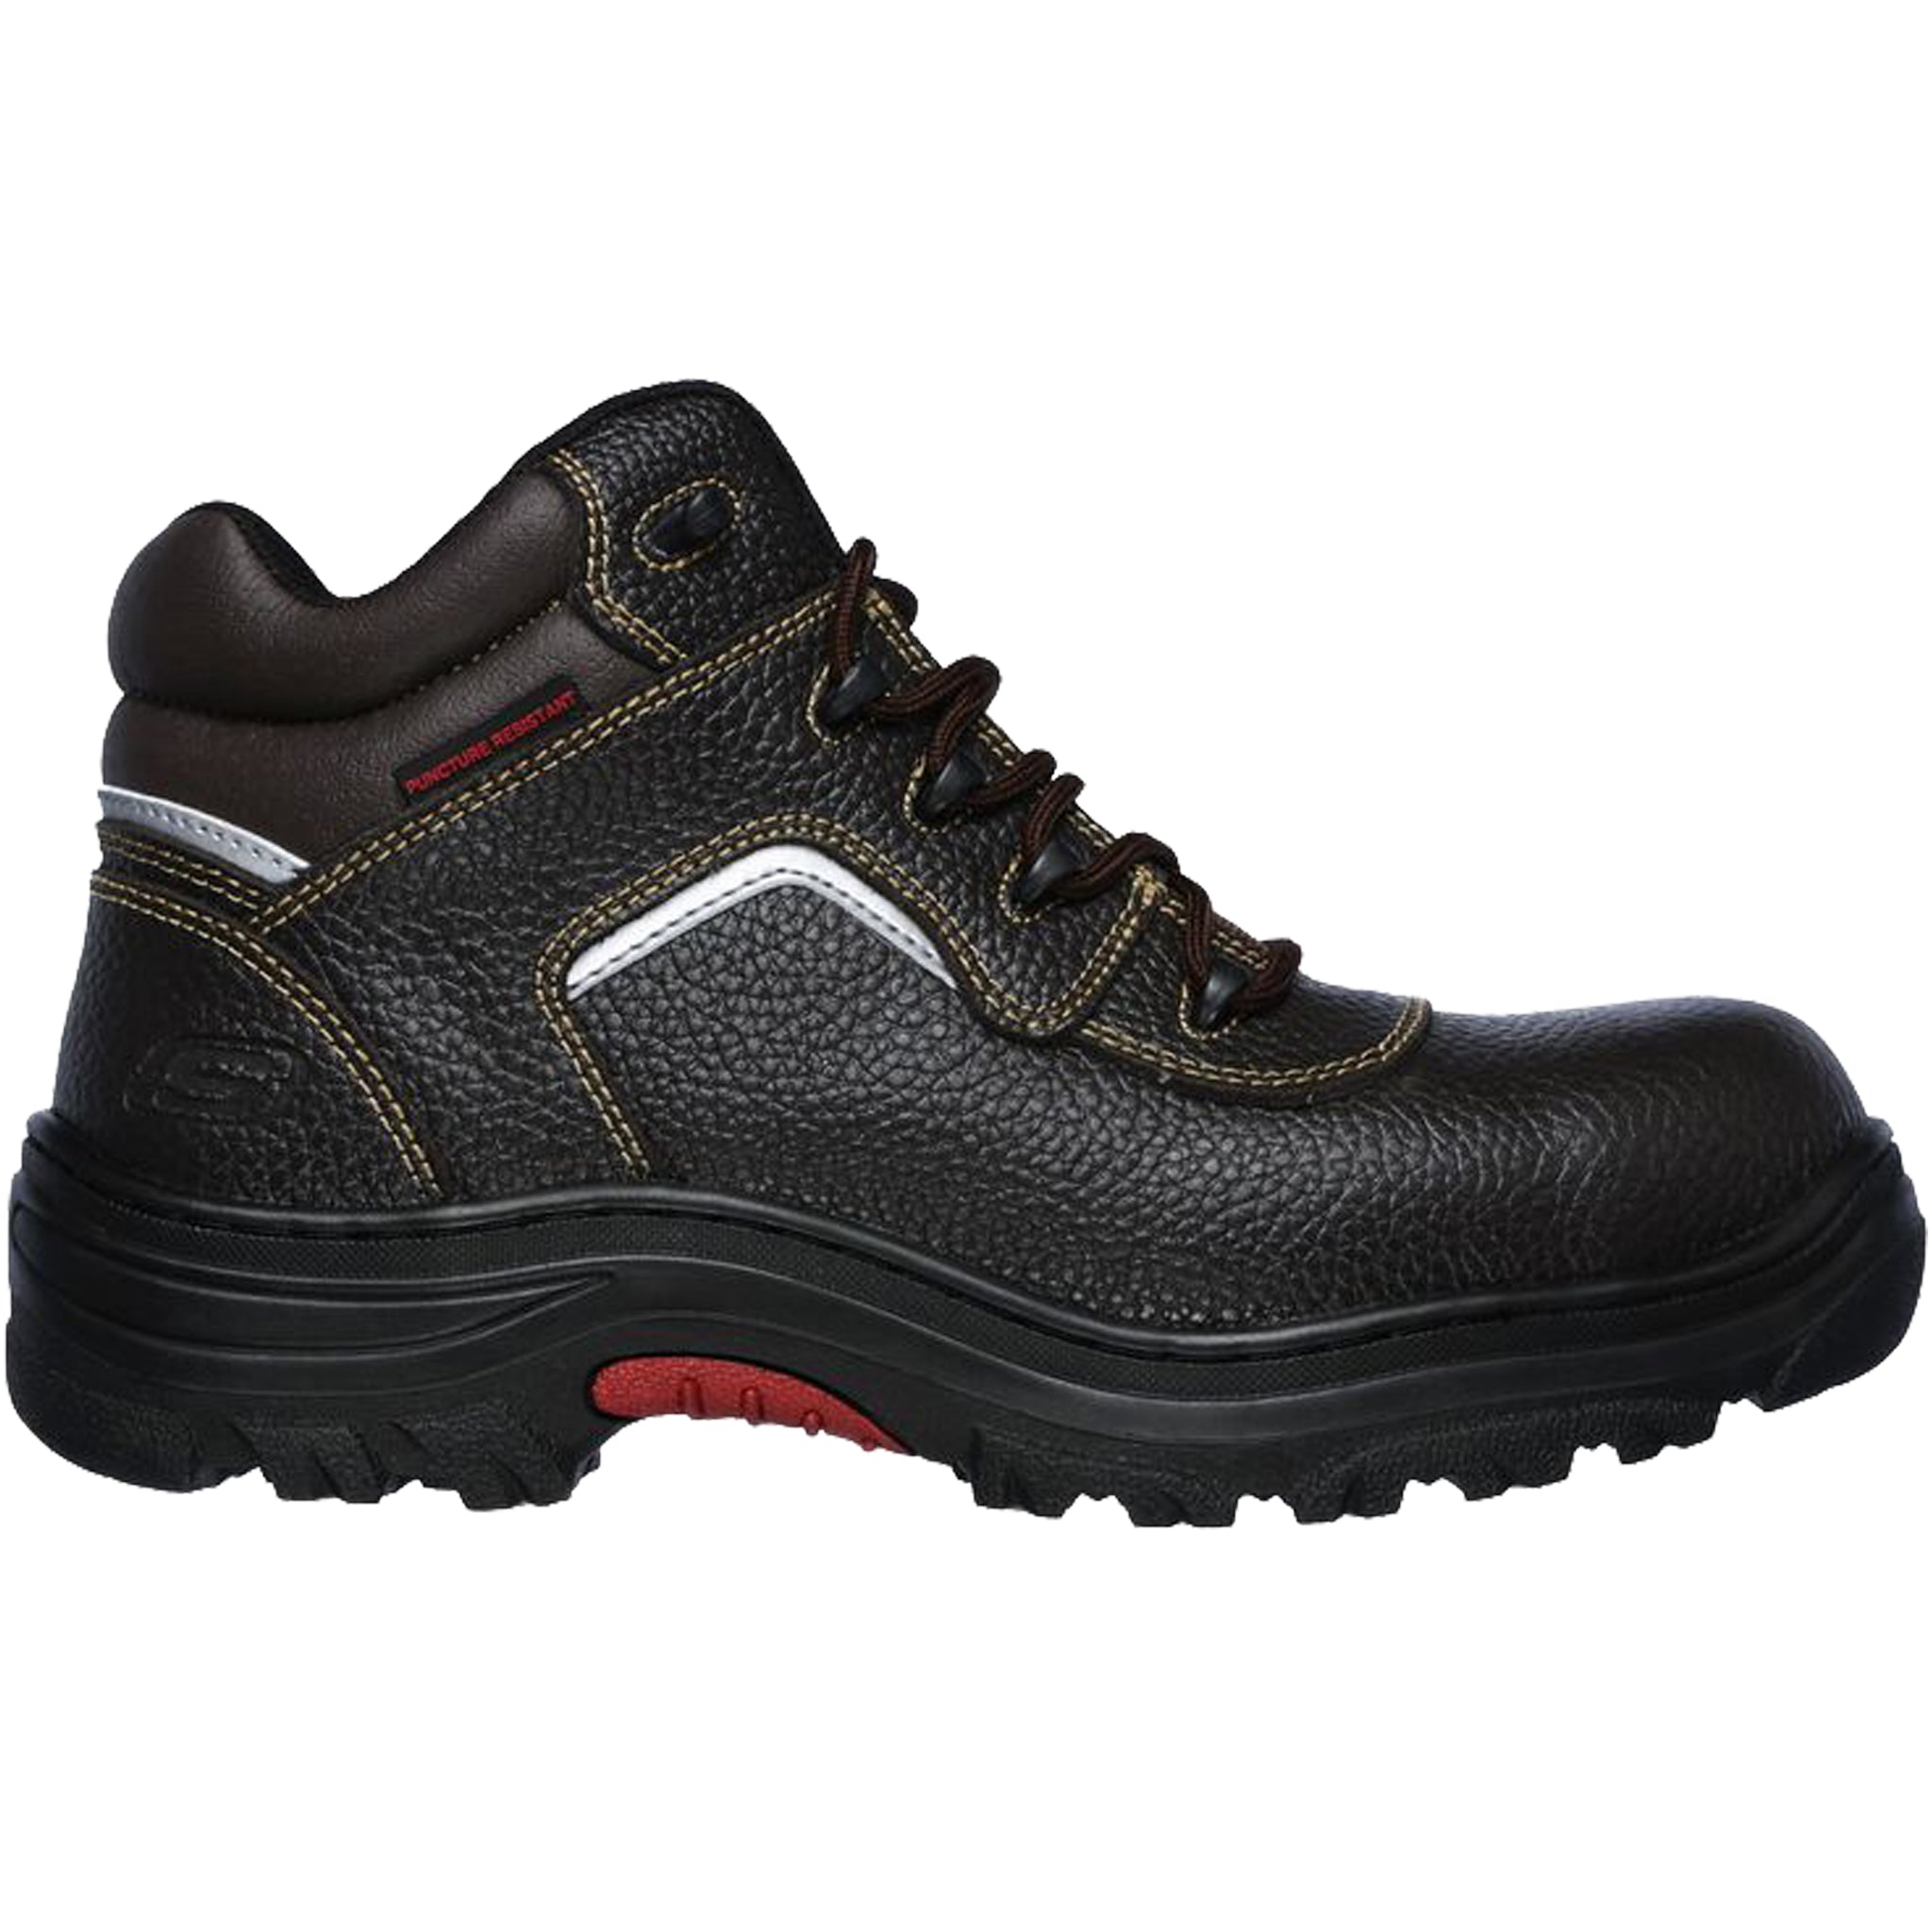 Skechers Men's 77144 Burgin Soster Composite Safety Toe Memory That Shoe and More